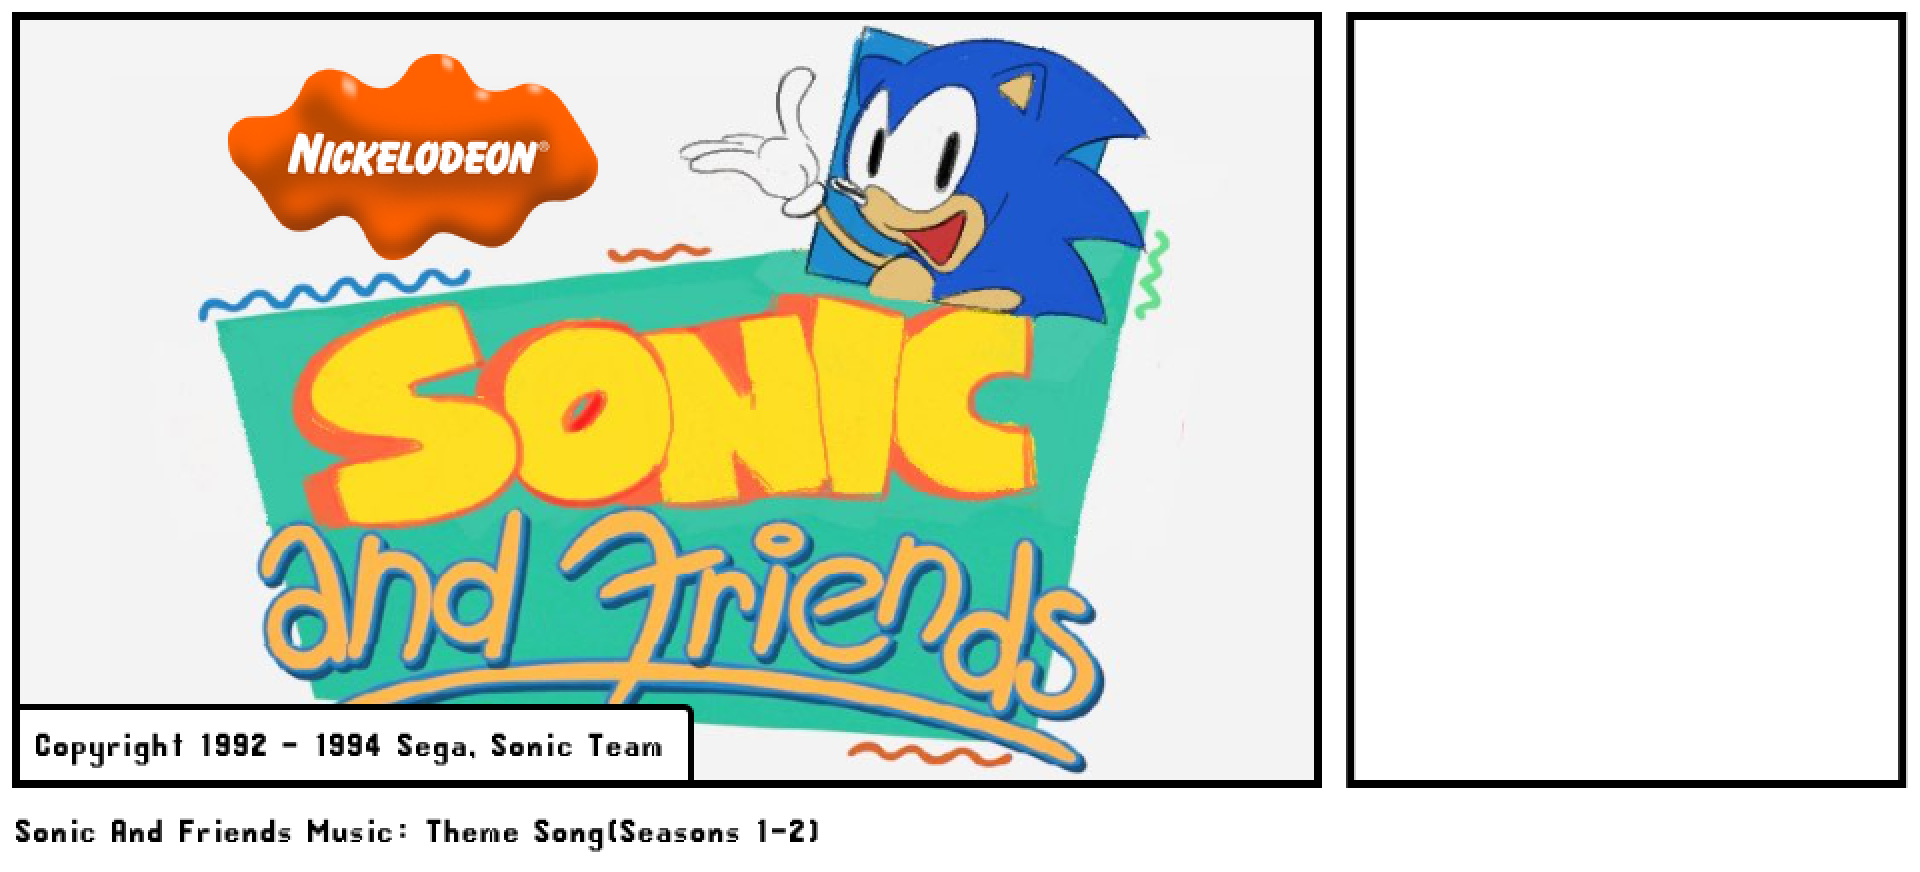 Sonic And Friends Music: Theme Song(Seasons 1-2)